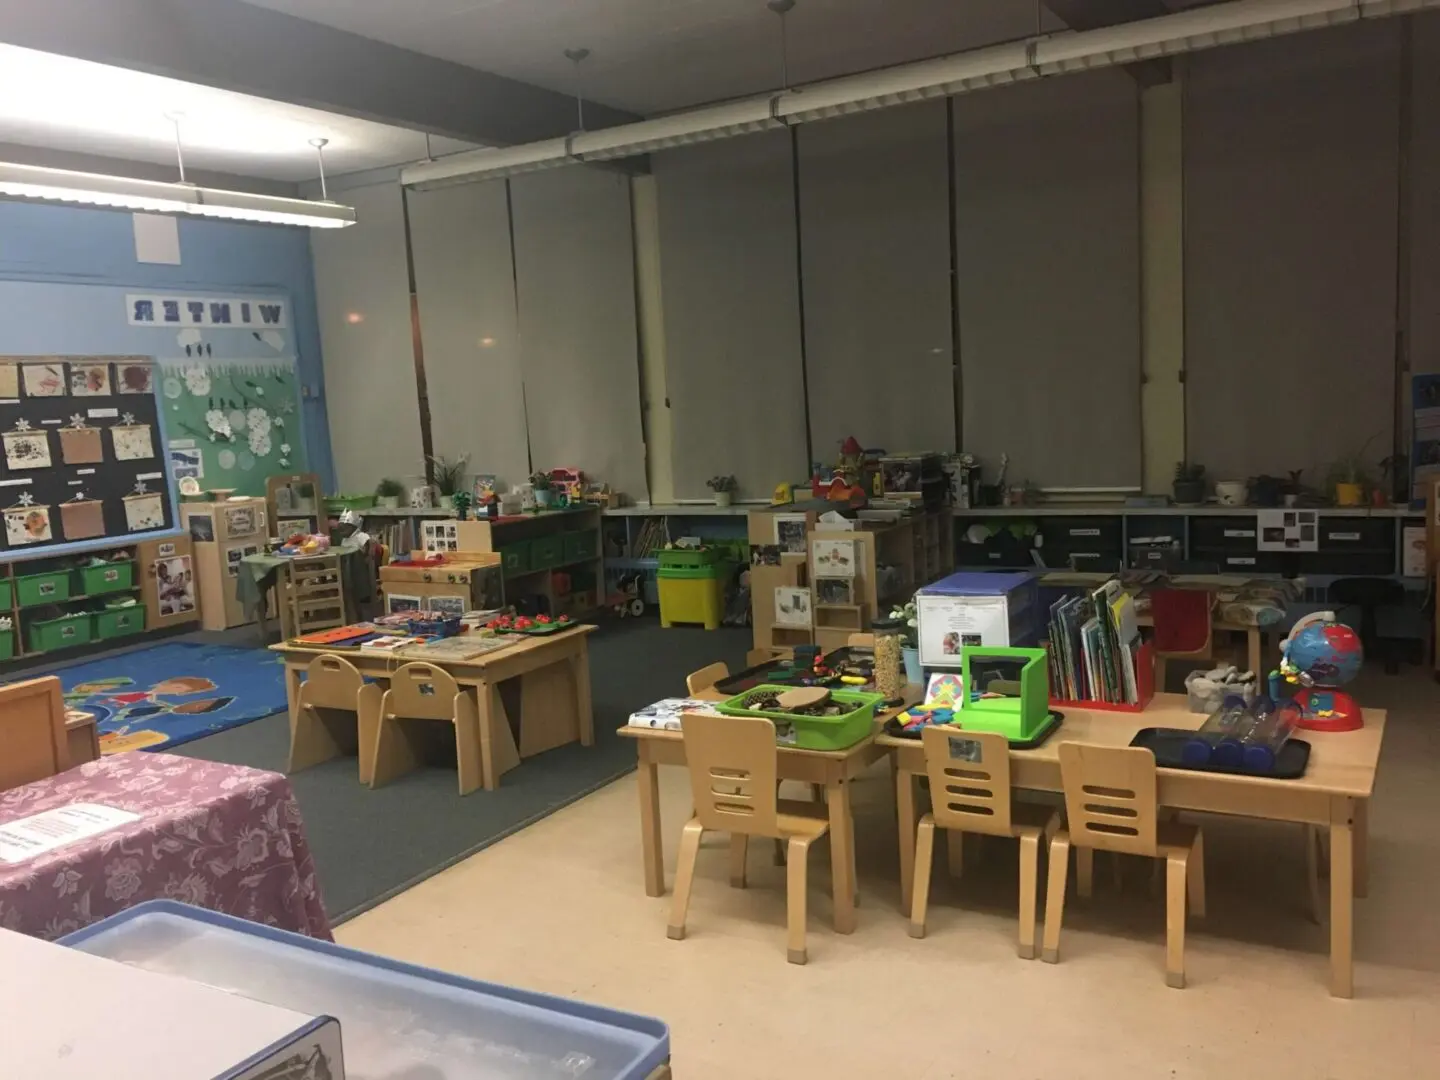 Picture of Preschool with arranged chairs and tables